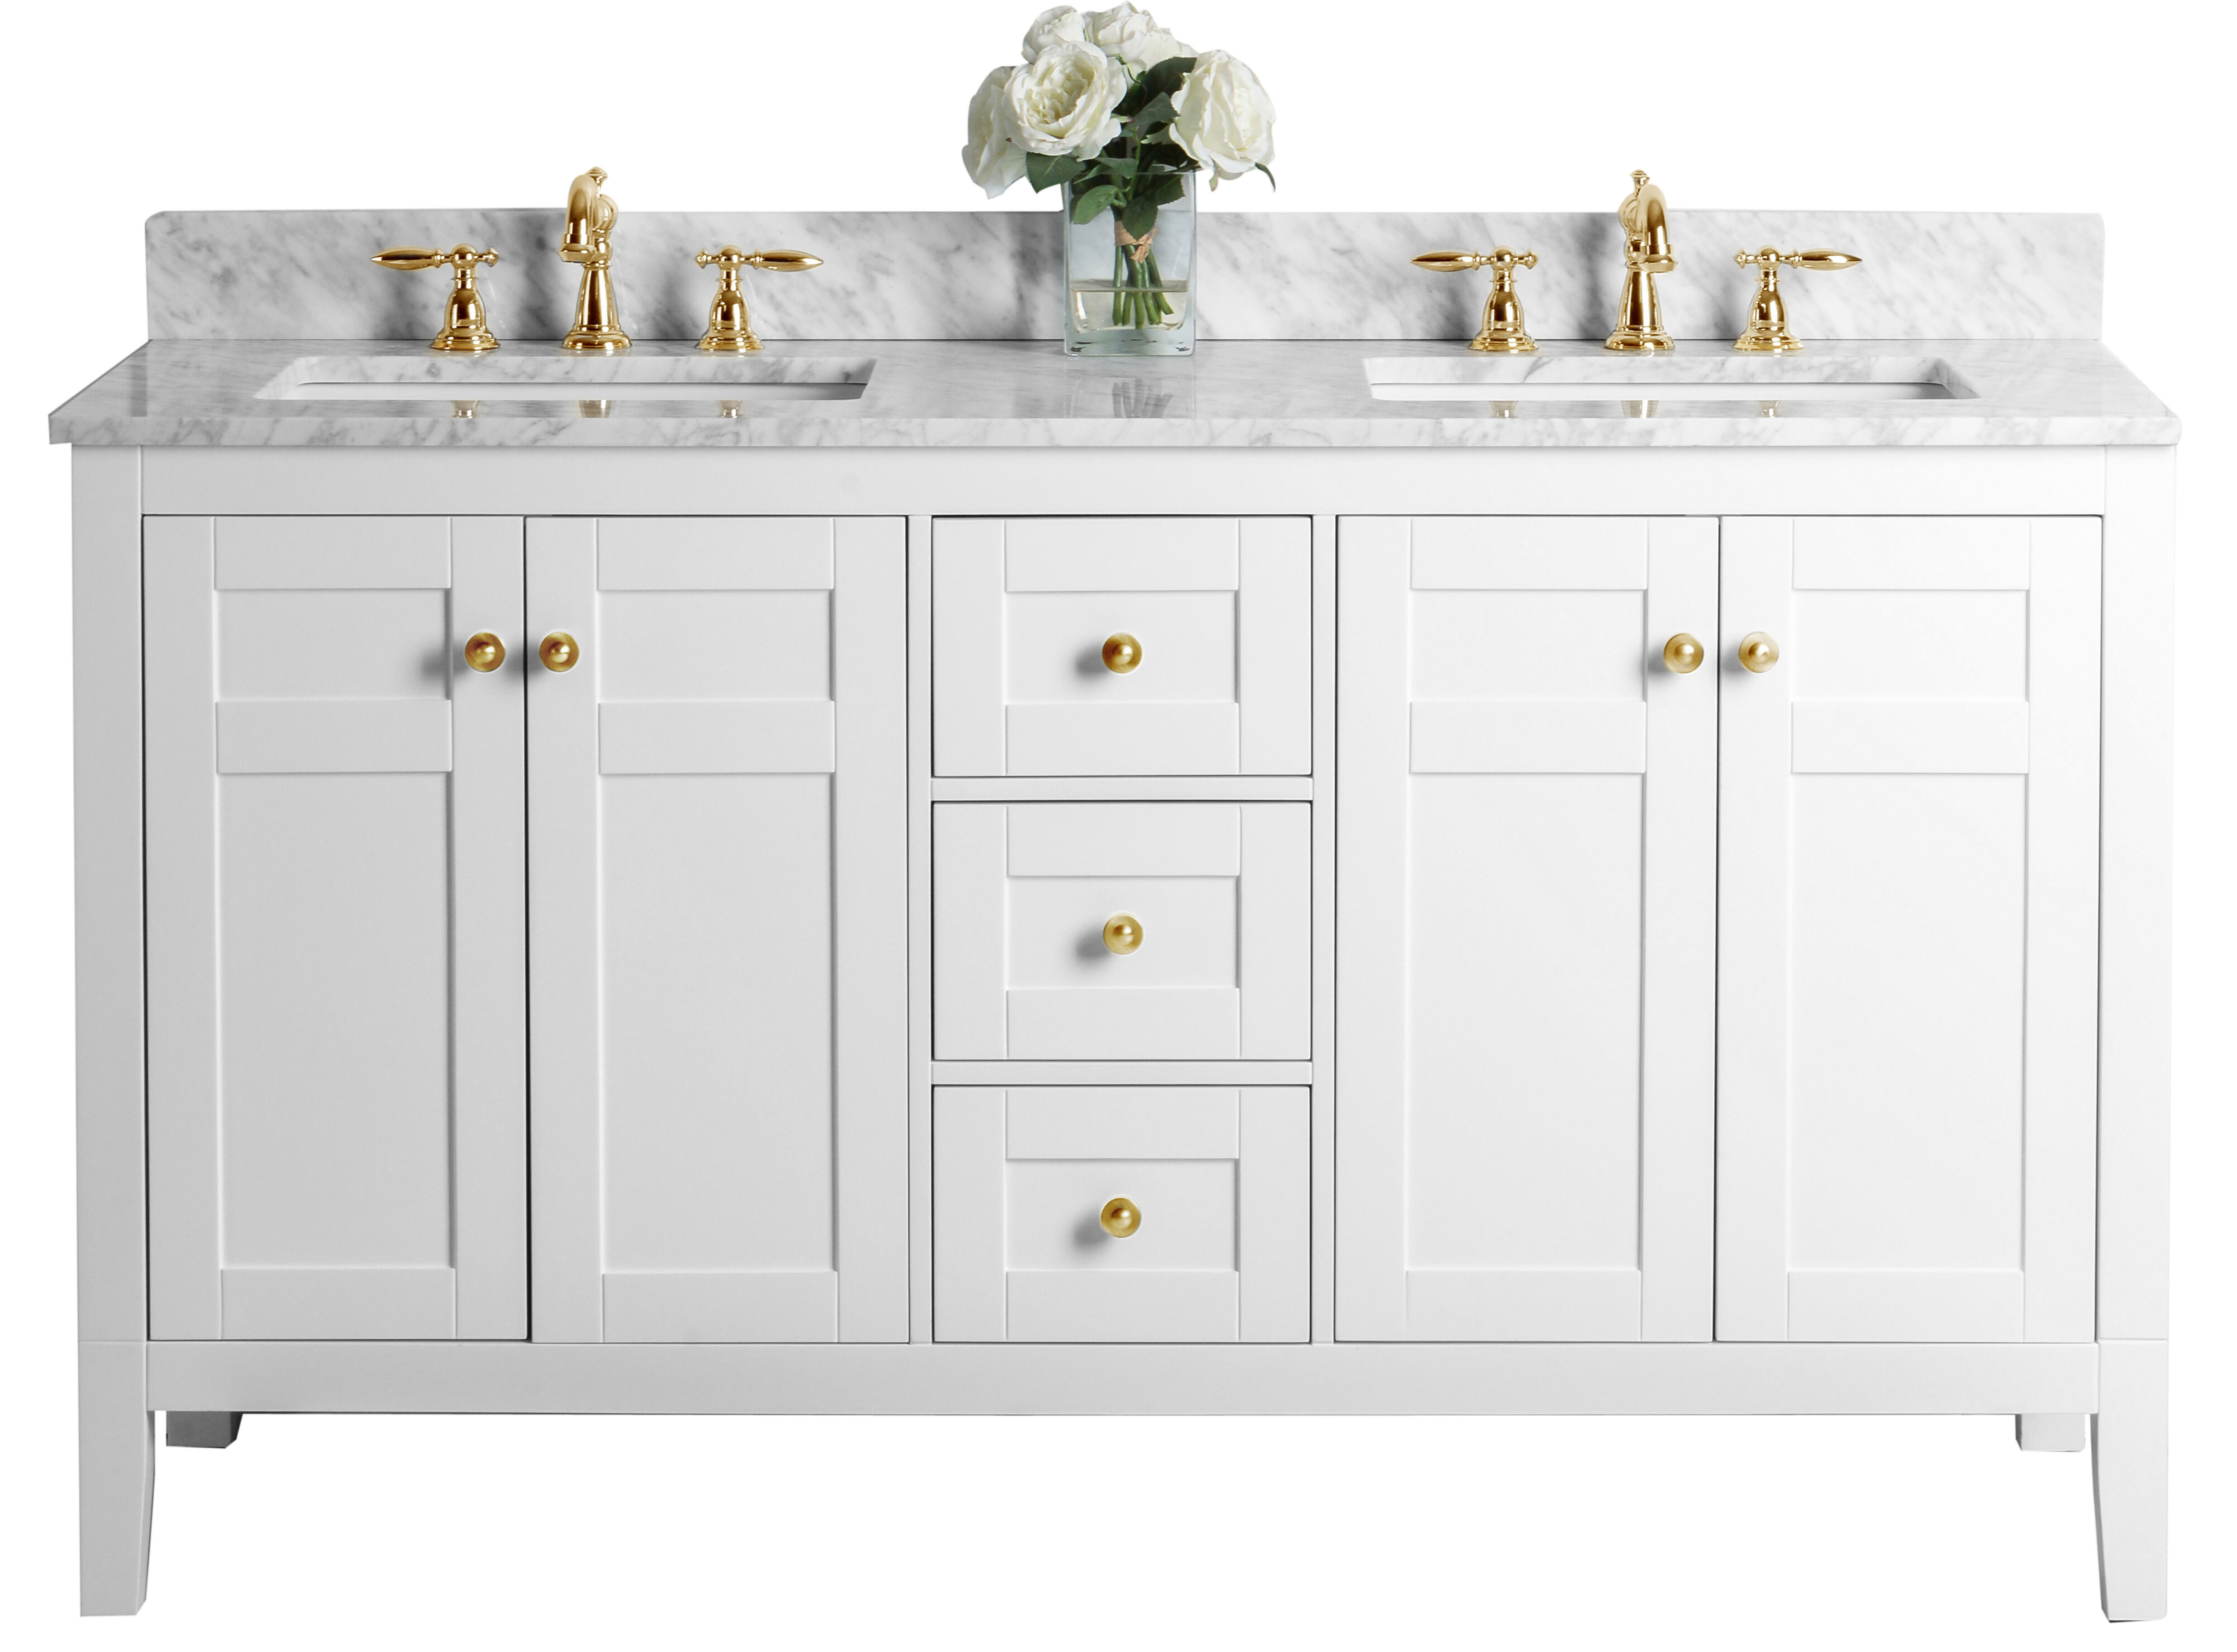 60" Bath Vanity Set in White Finish with Italian Carrara White Marble Vanity top and White Undermount Basin with Gold Hardware